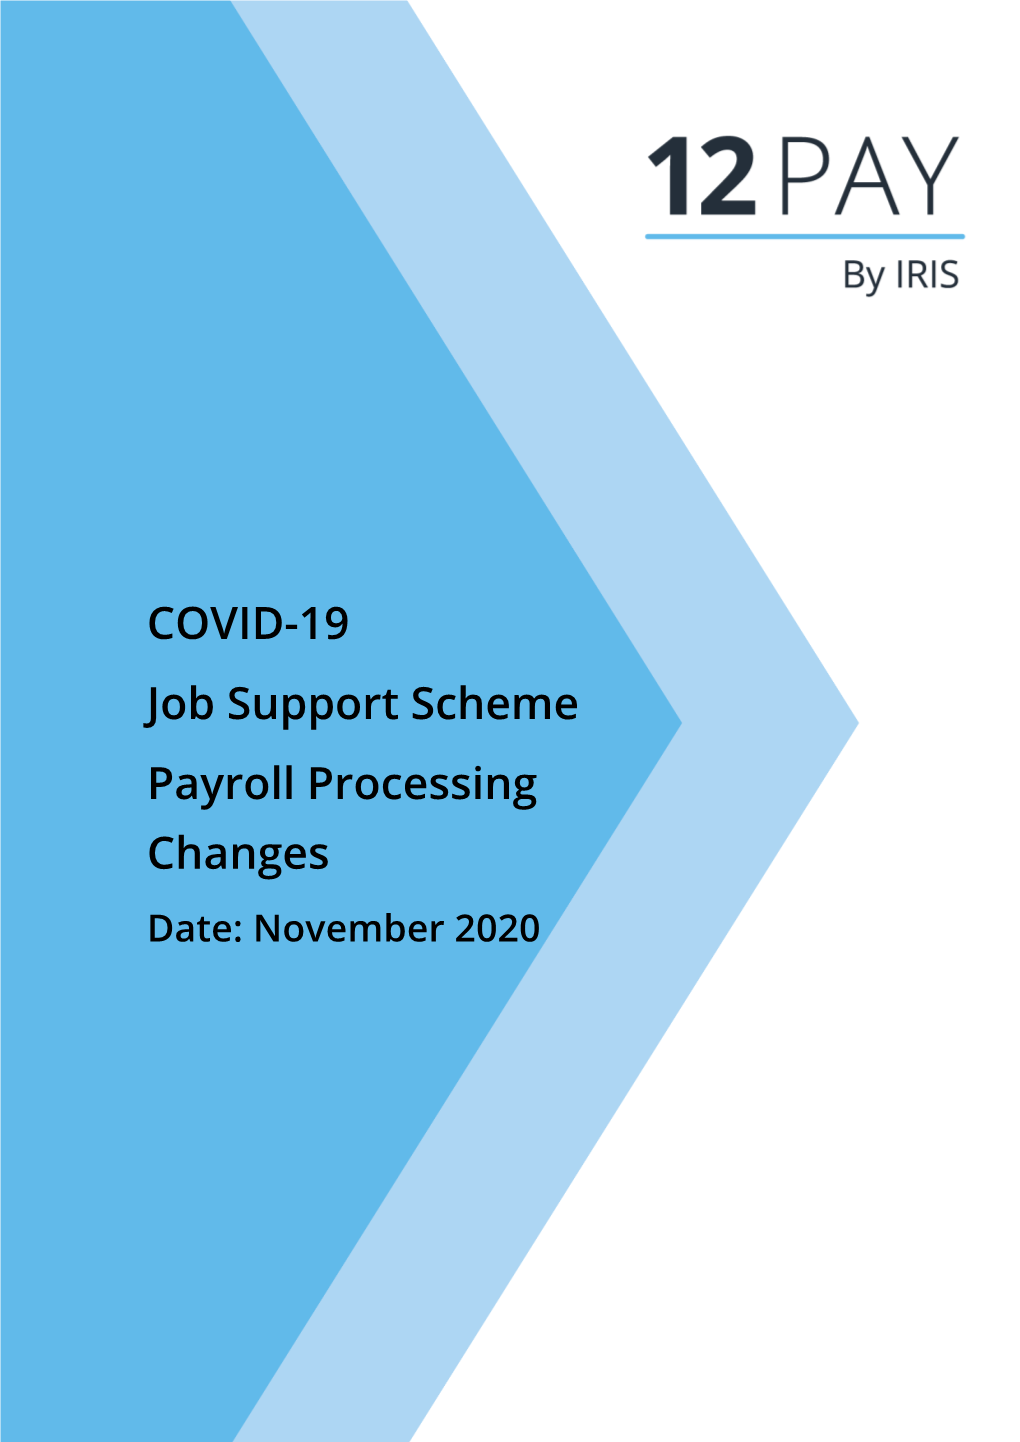 COVID-19 Job Support Scheme Payroll Processing Changes Date: November 2020 Contents